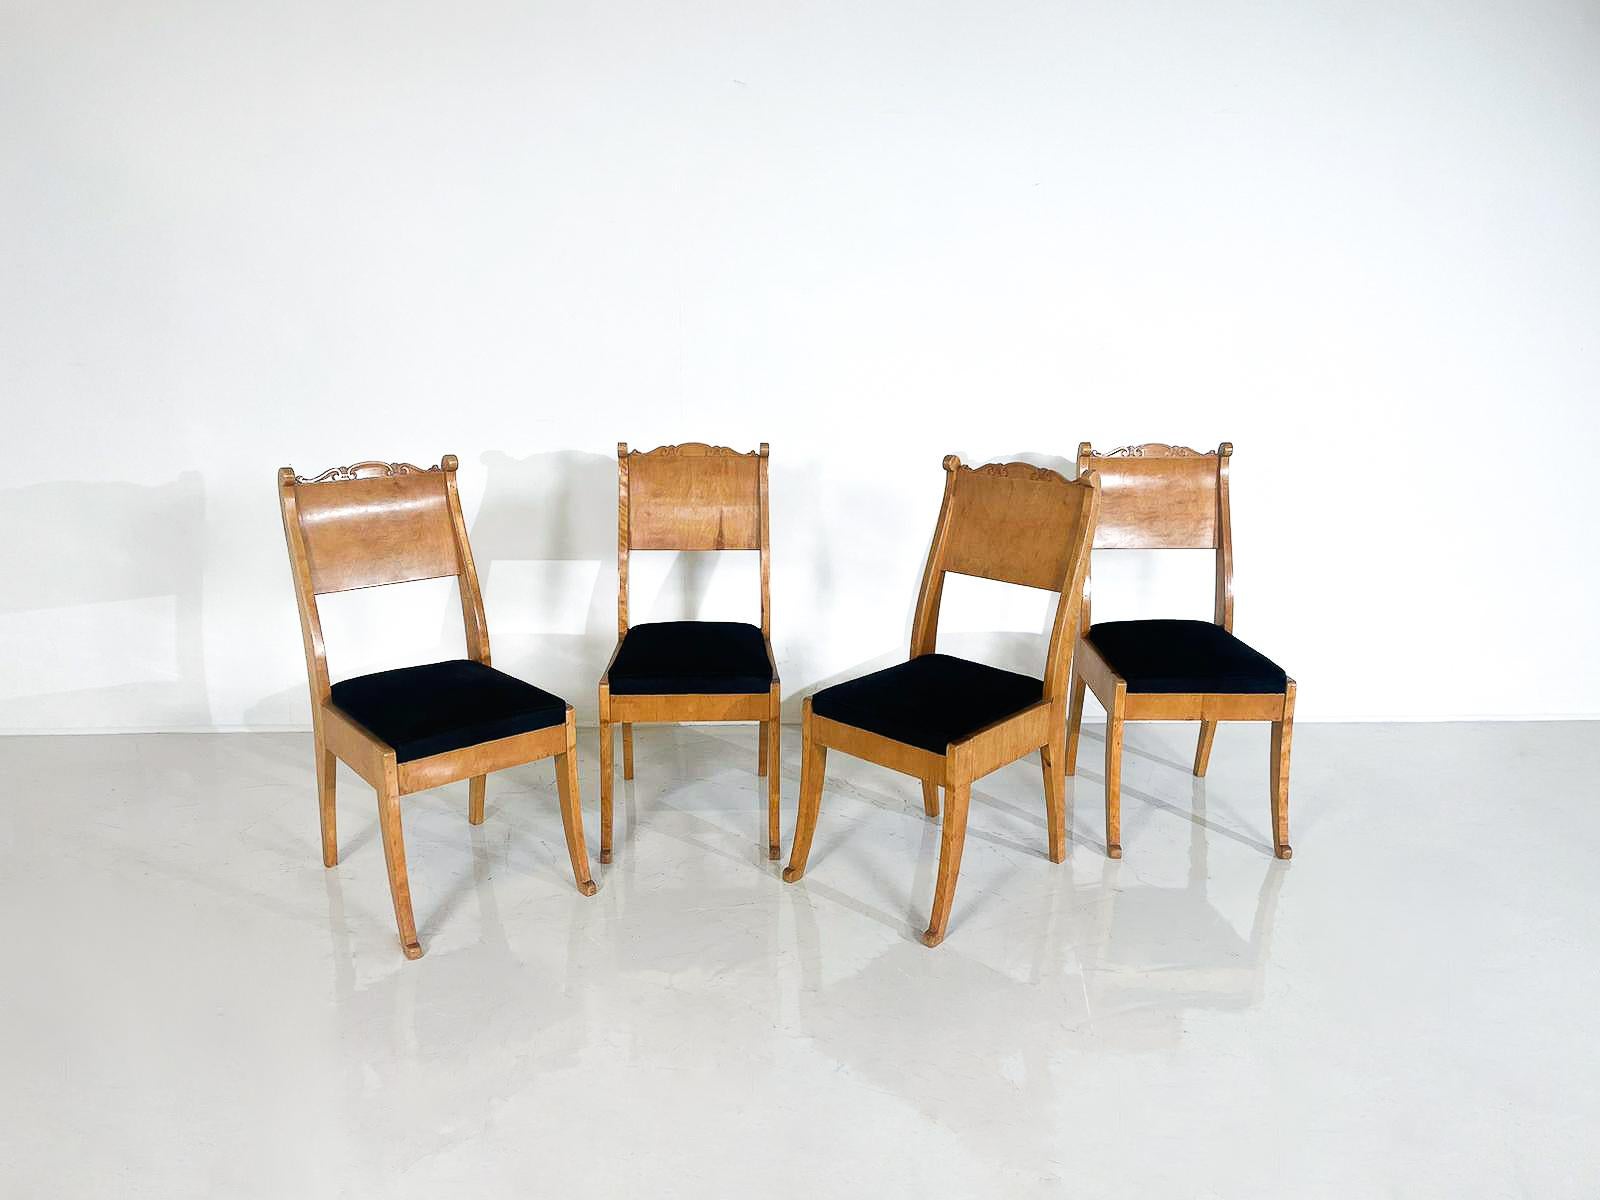 Set of 4 Russian Chairs, Birch Veneer, Early 19th Century For Sale 4